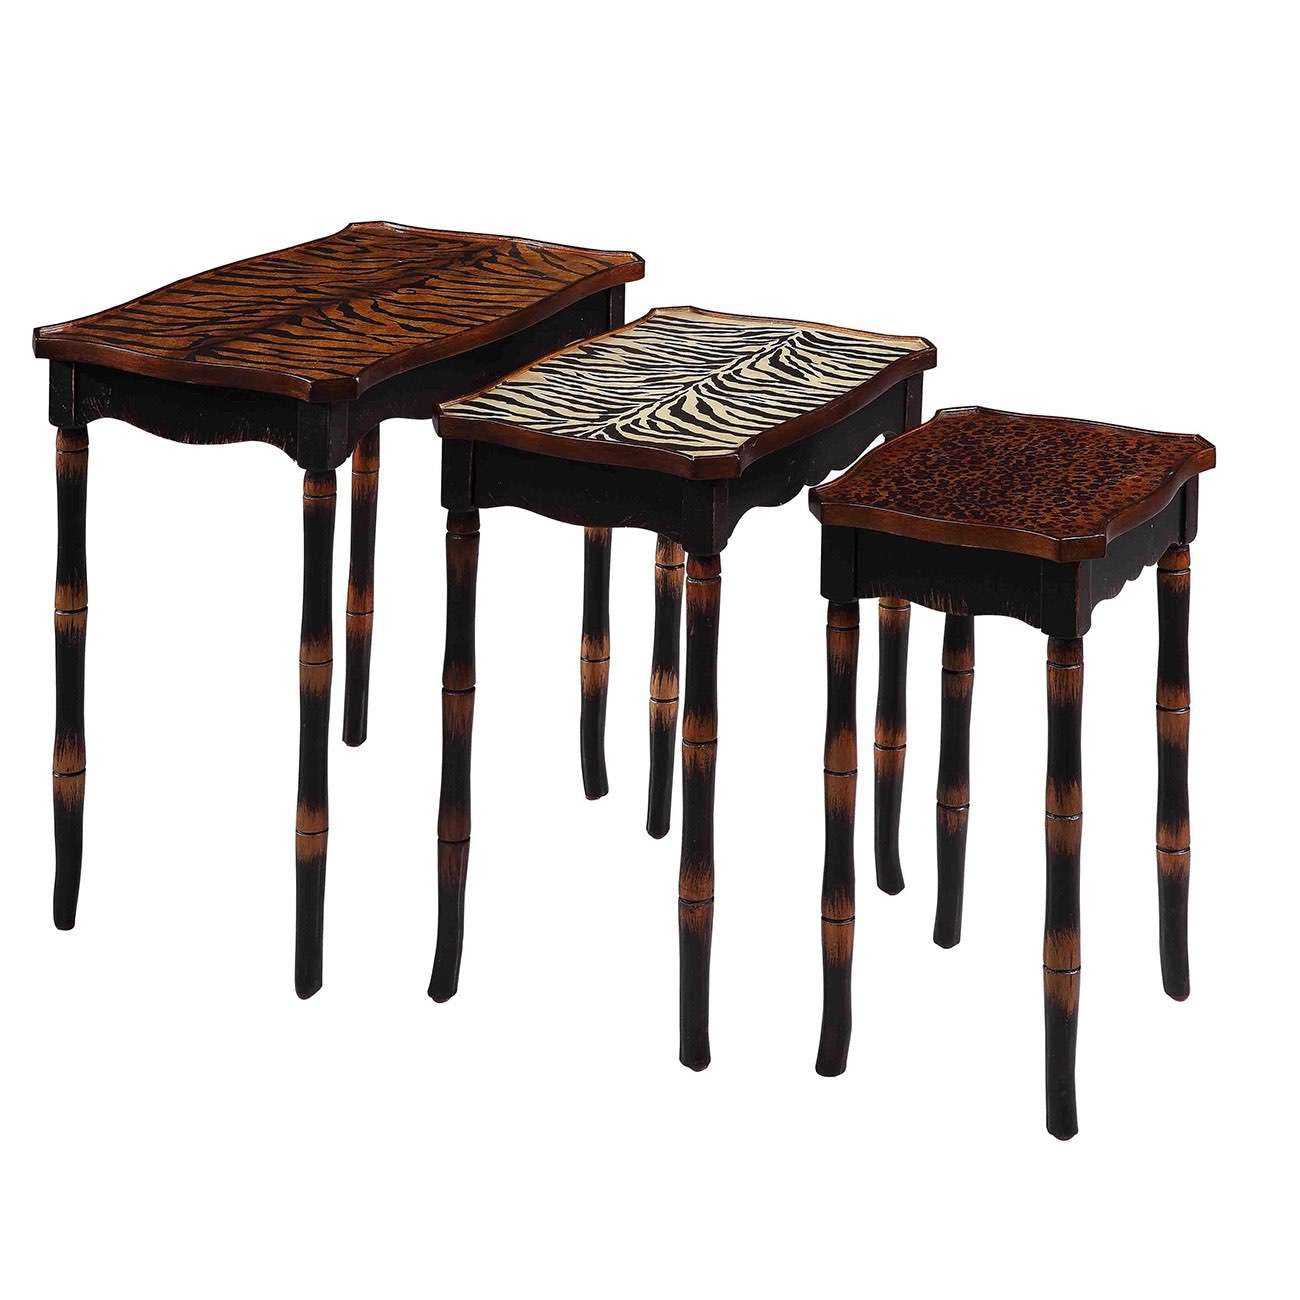 Coffee Table|end table|side table|Artech